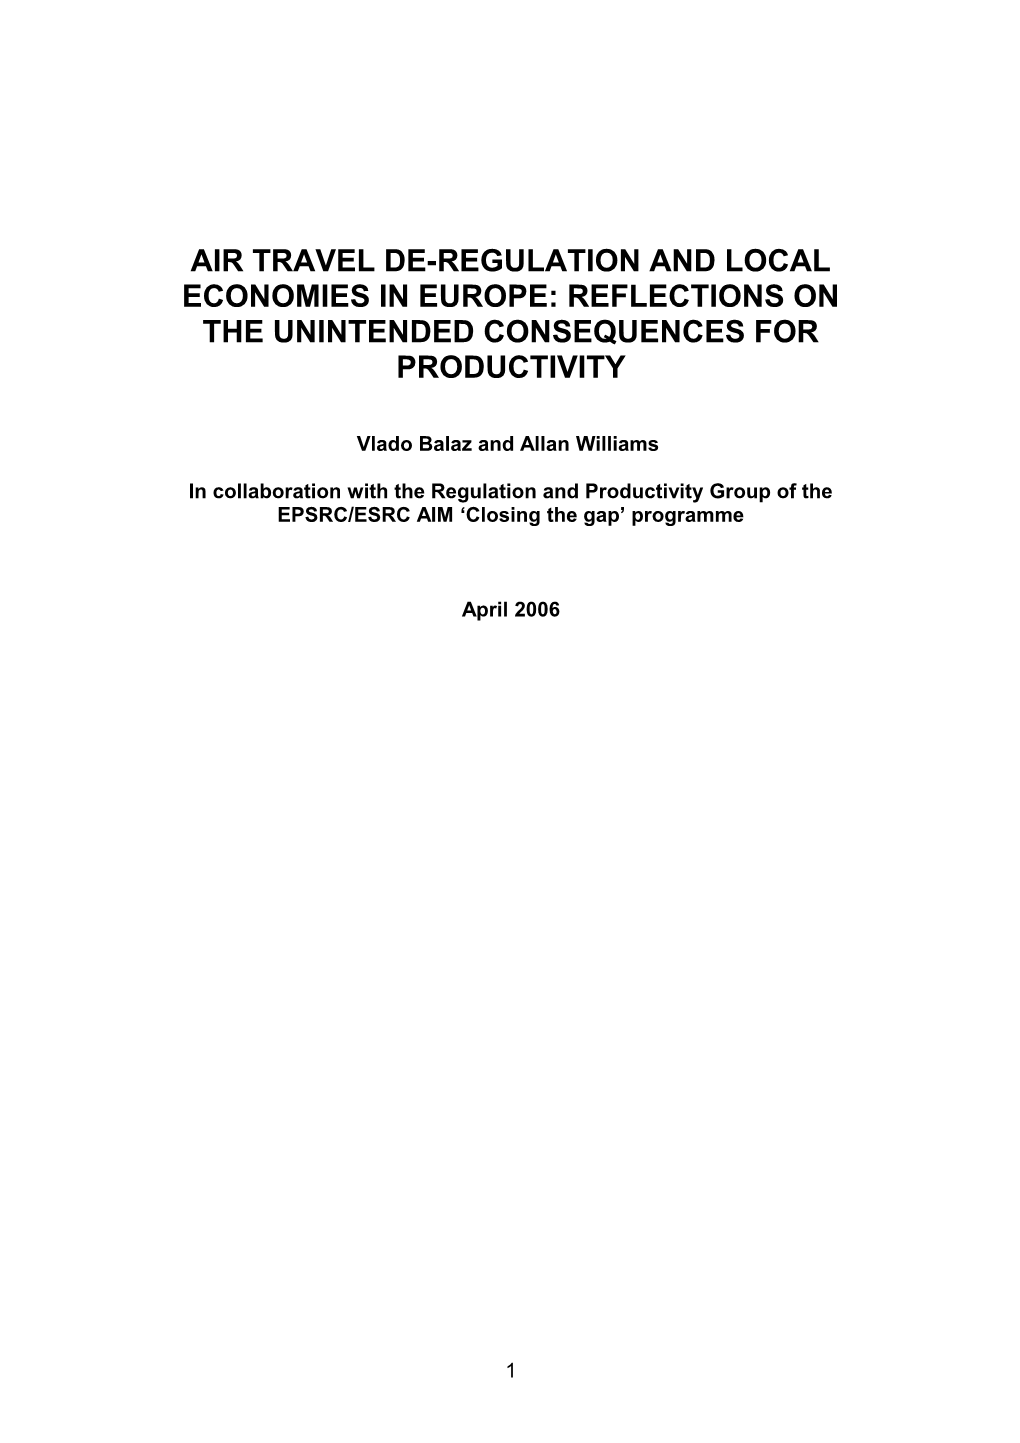 Air Travel De-Regulation and Local Economic Development in Europe: Reflections on the Unintended